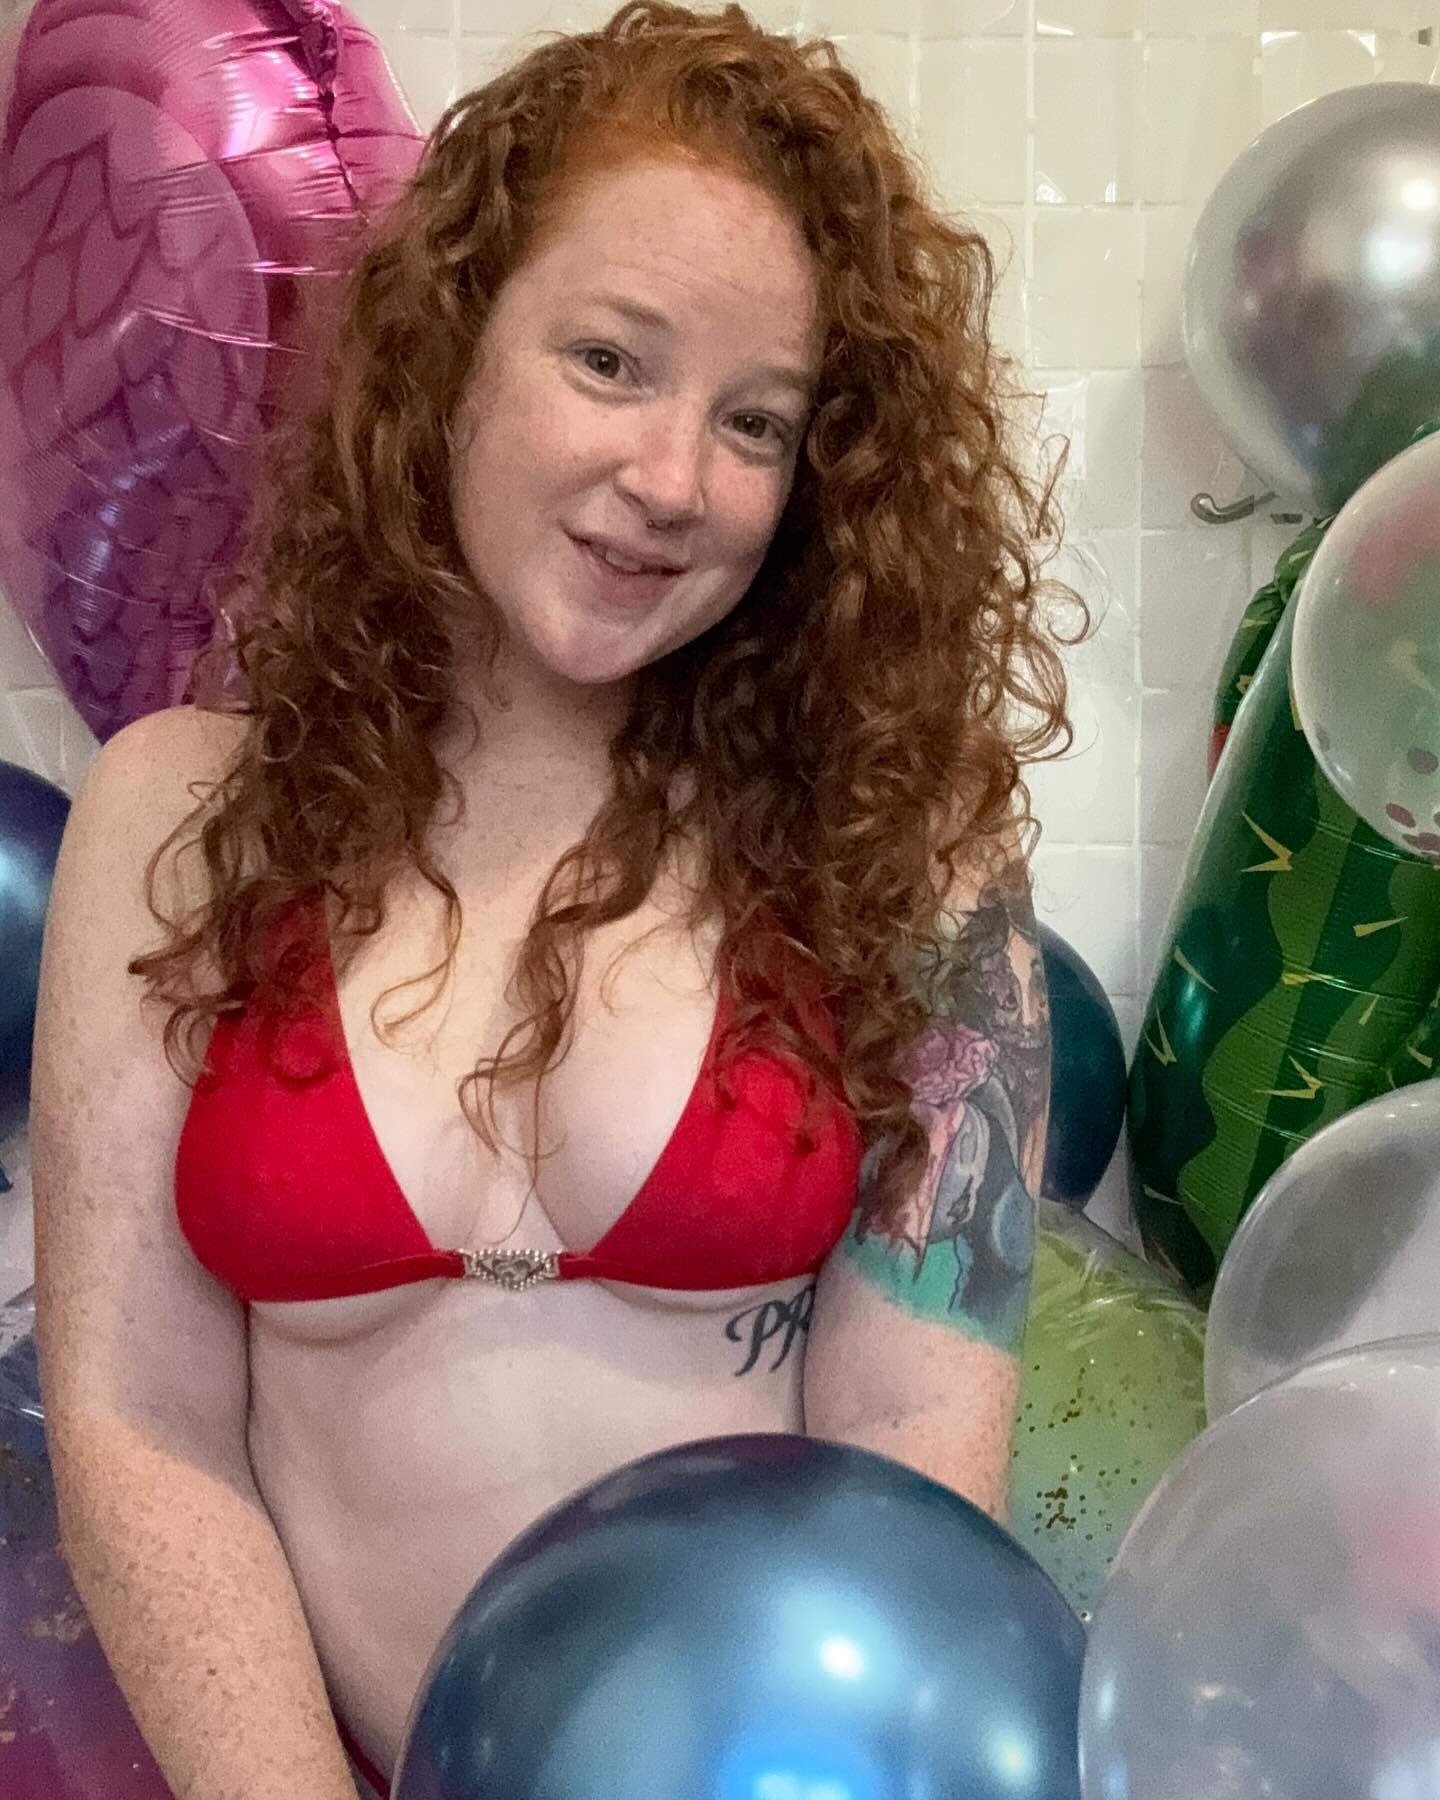 Happy Monday and April 1st! Don’t comment that I look tired, I know. I’m not wearing any makeup 😅 Fun fact: After taking these photos, during the deflation of the helium balloons, I found out my cat does not like the sound of helium voice 😅😂